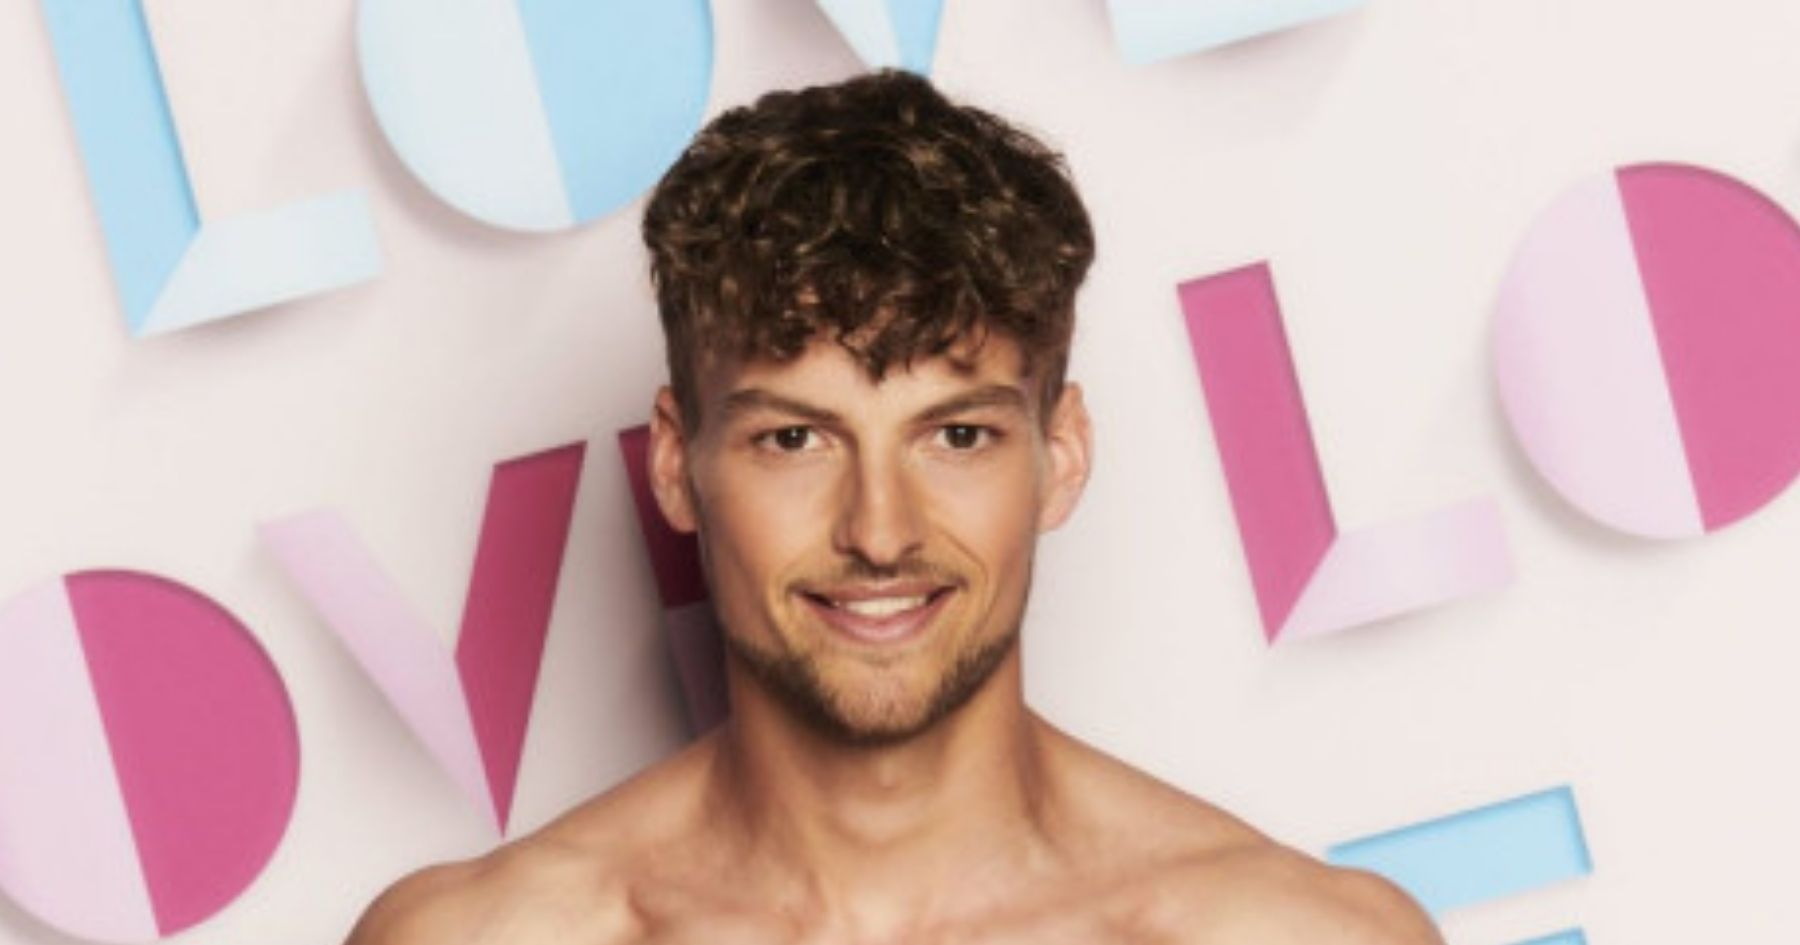 Hugo Hammond to become first ‘Love Island’ contestant with a disability